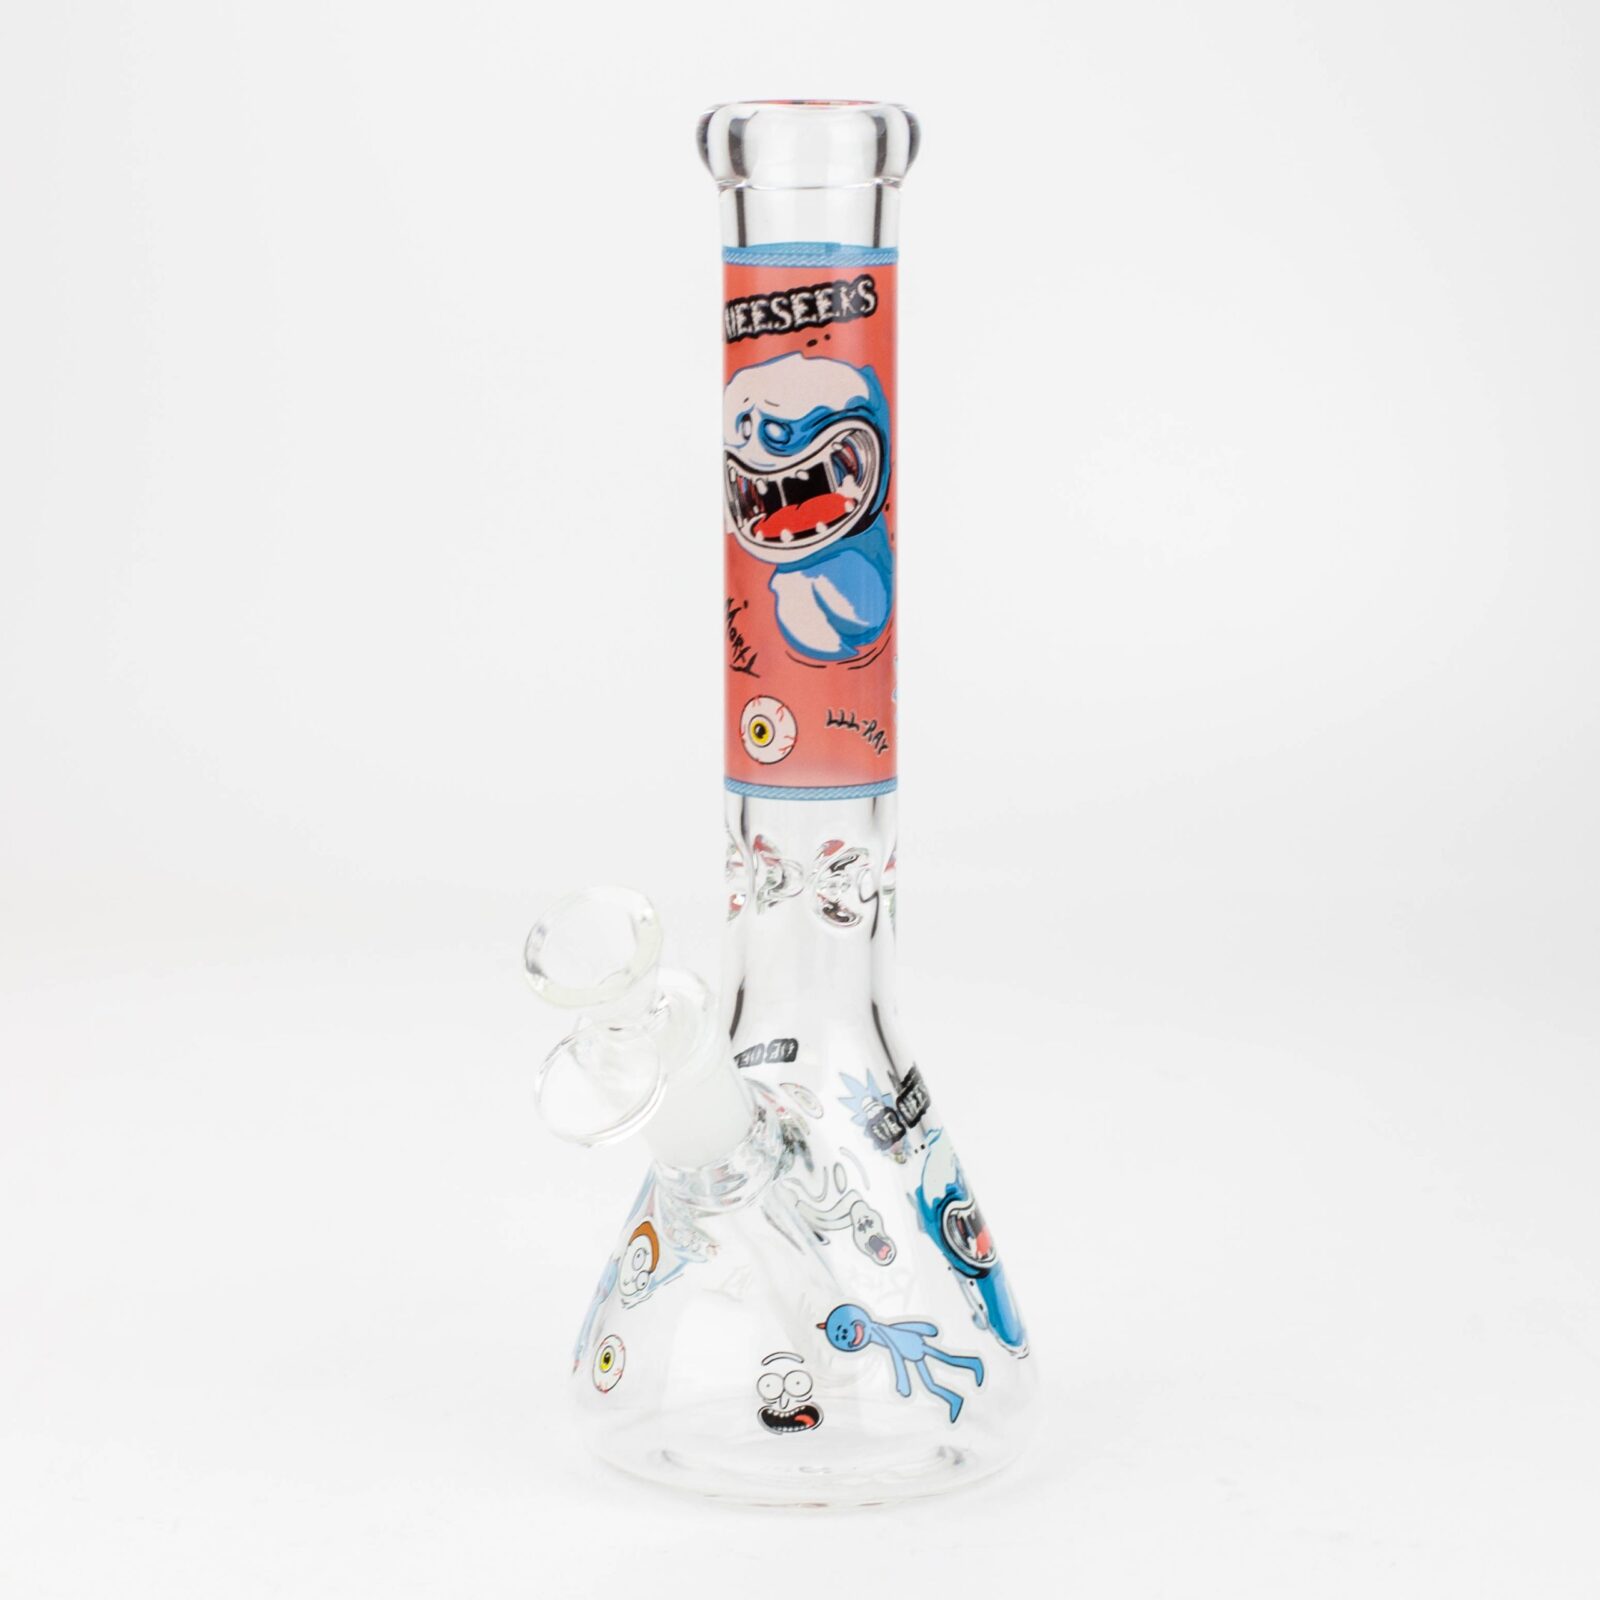 Graphic B - Decal Glow in the dark glass water bong